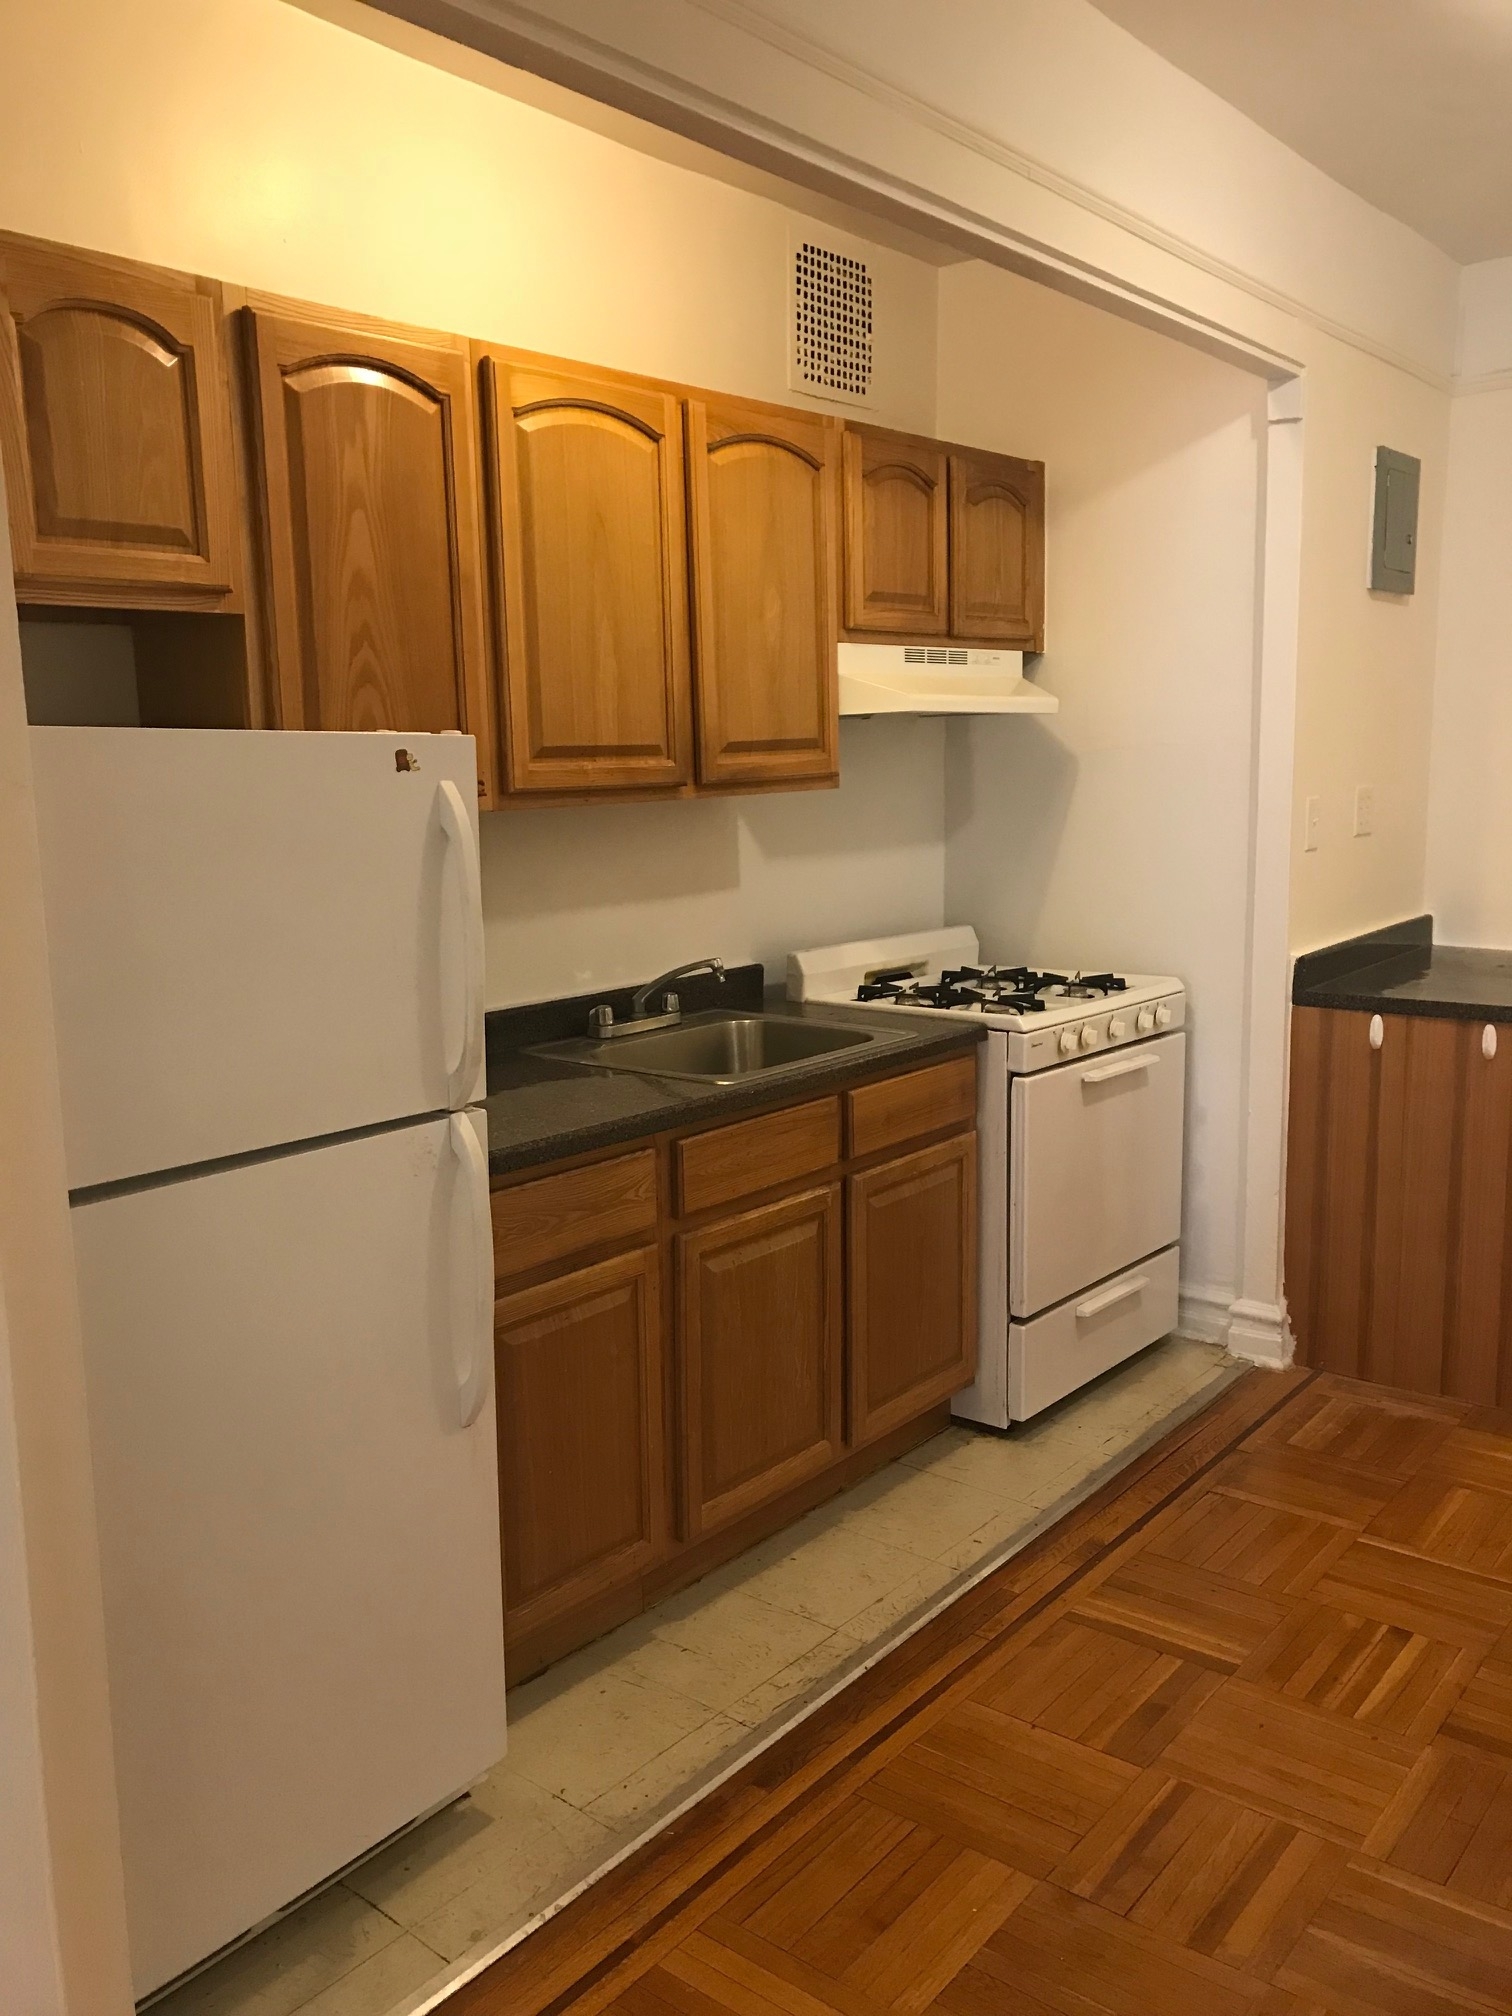 Apartment in Forest Hills - 73rd Road  Queens, NY 11375